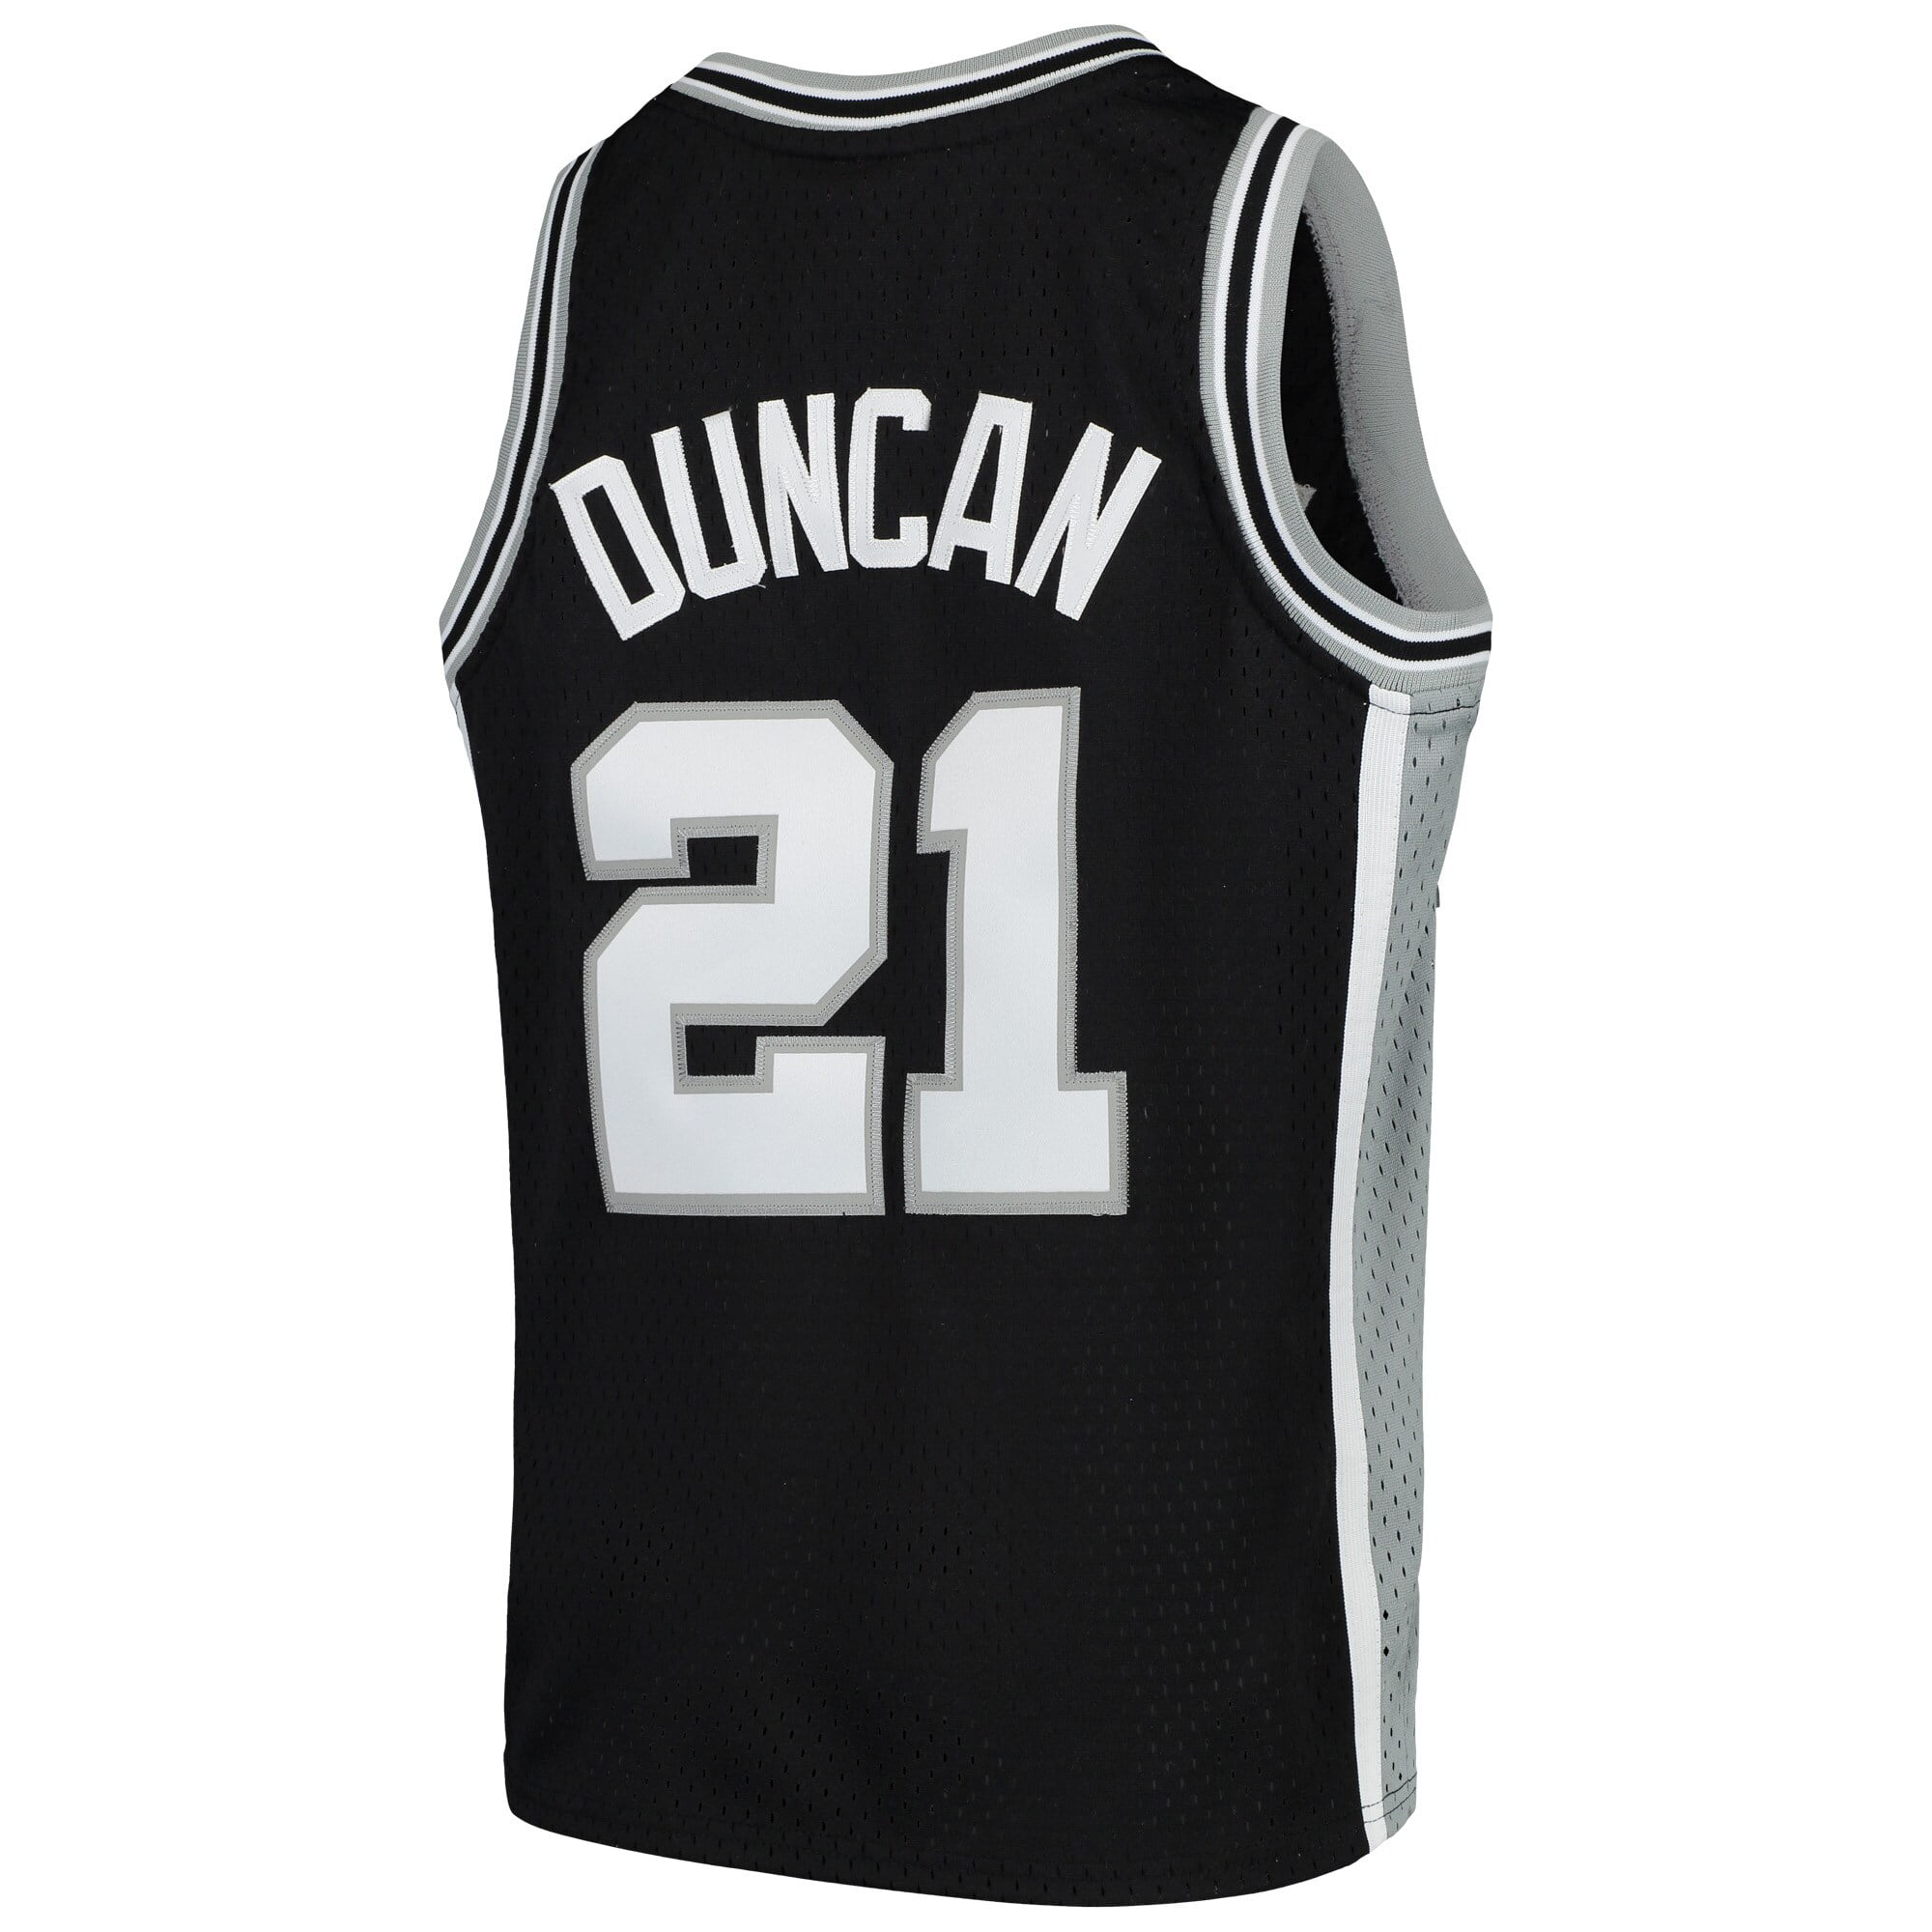 youth spurs jersey